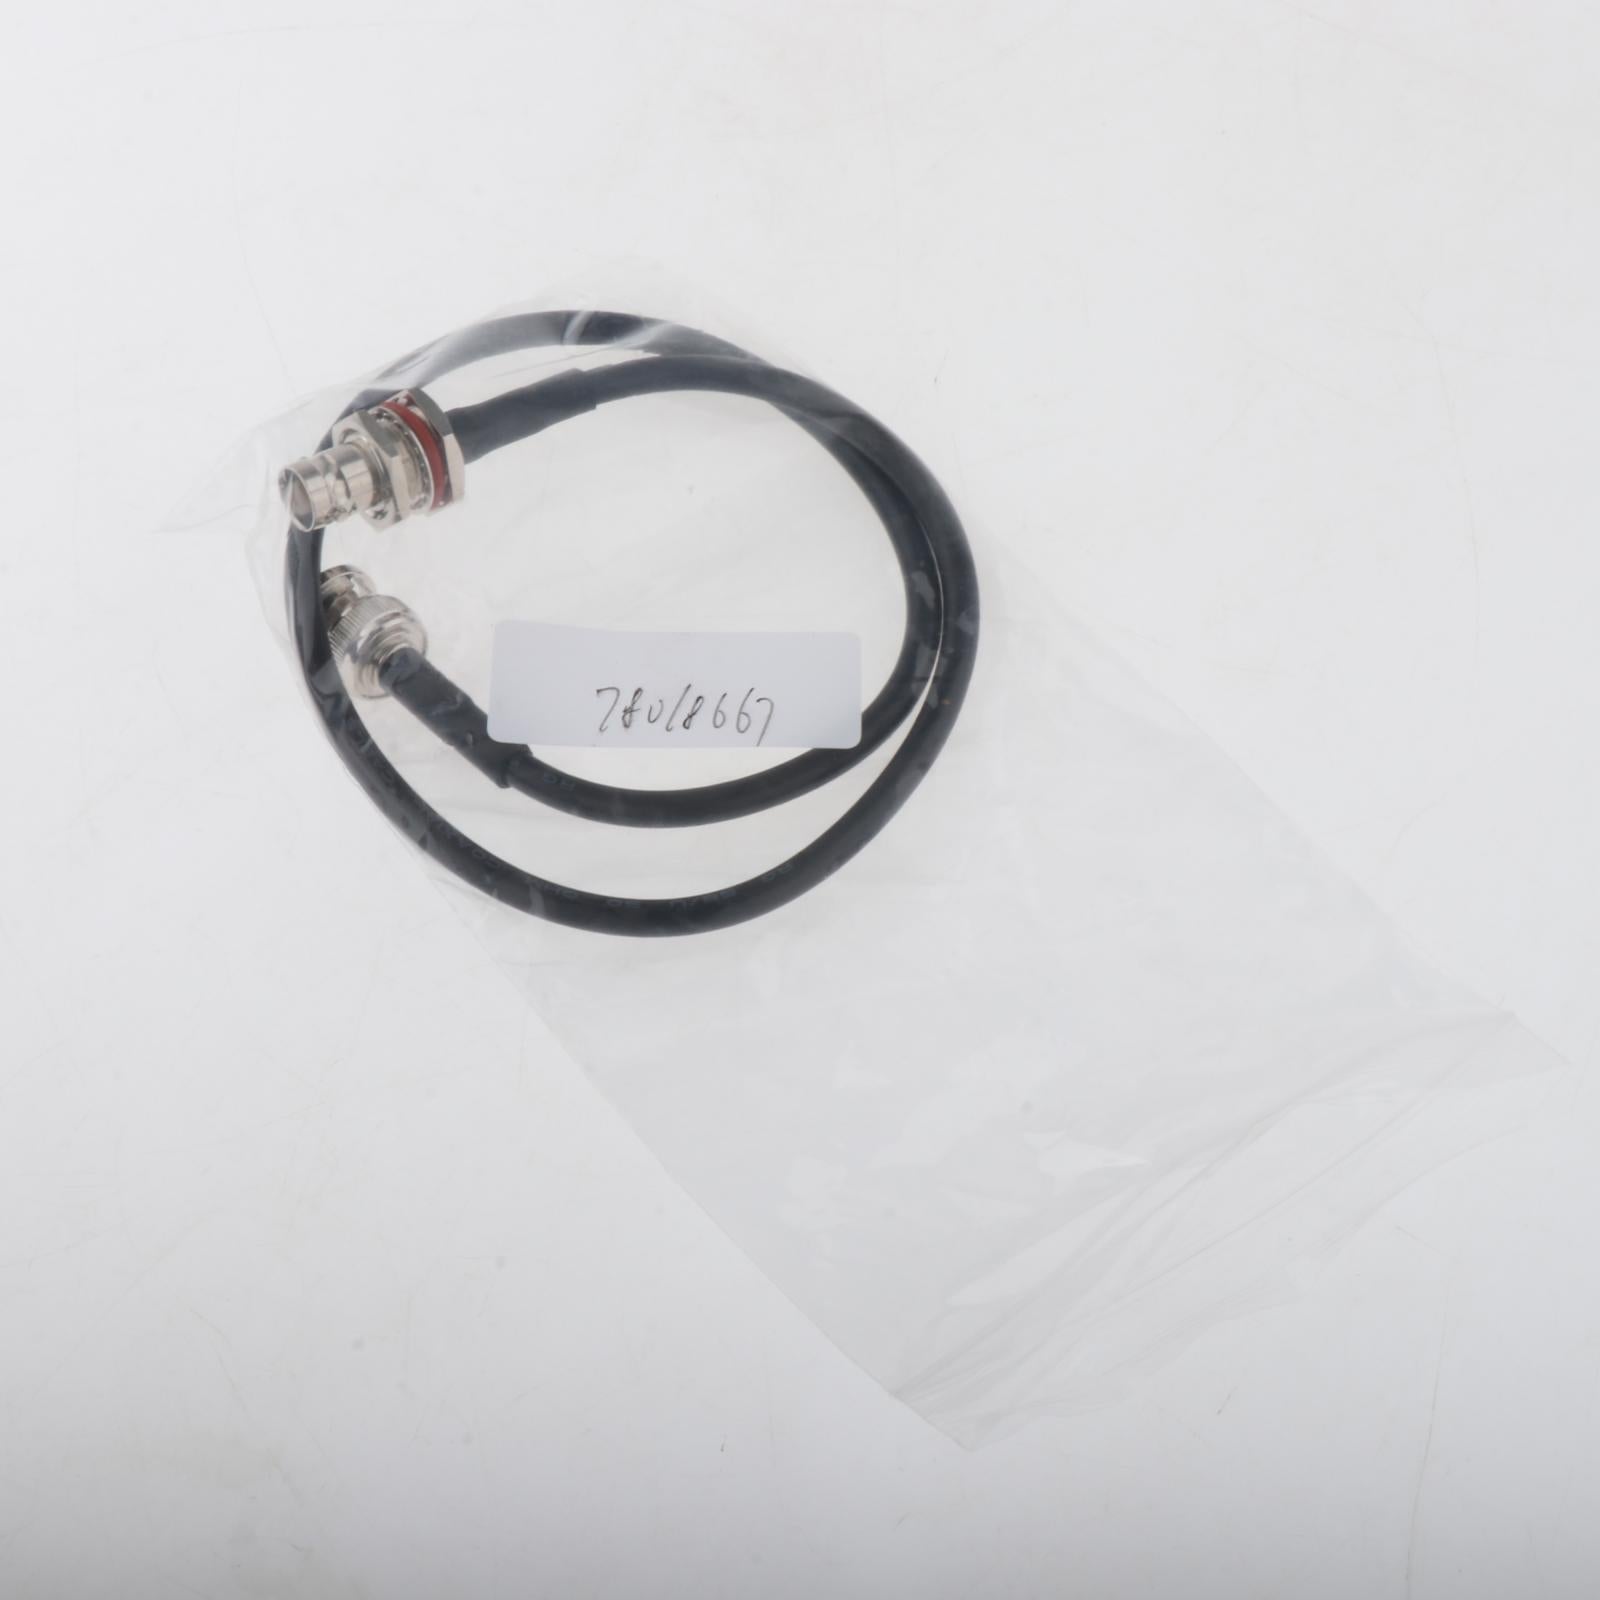 Zinc Alloy Extended Cable Hypercardioid for Wireless Microphones Systems